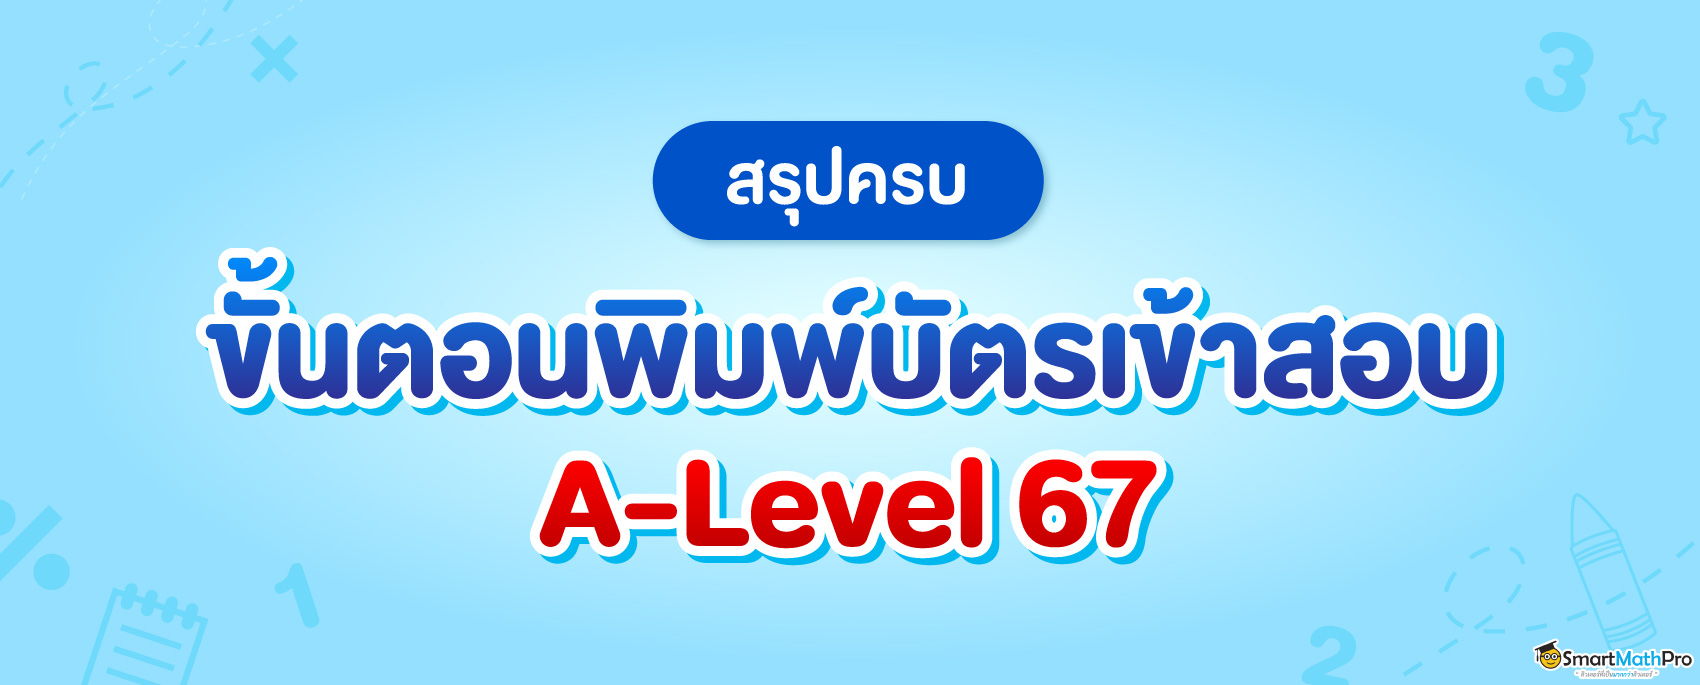 -A-Level